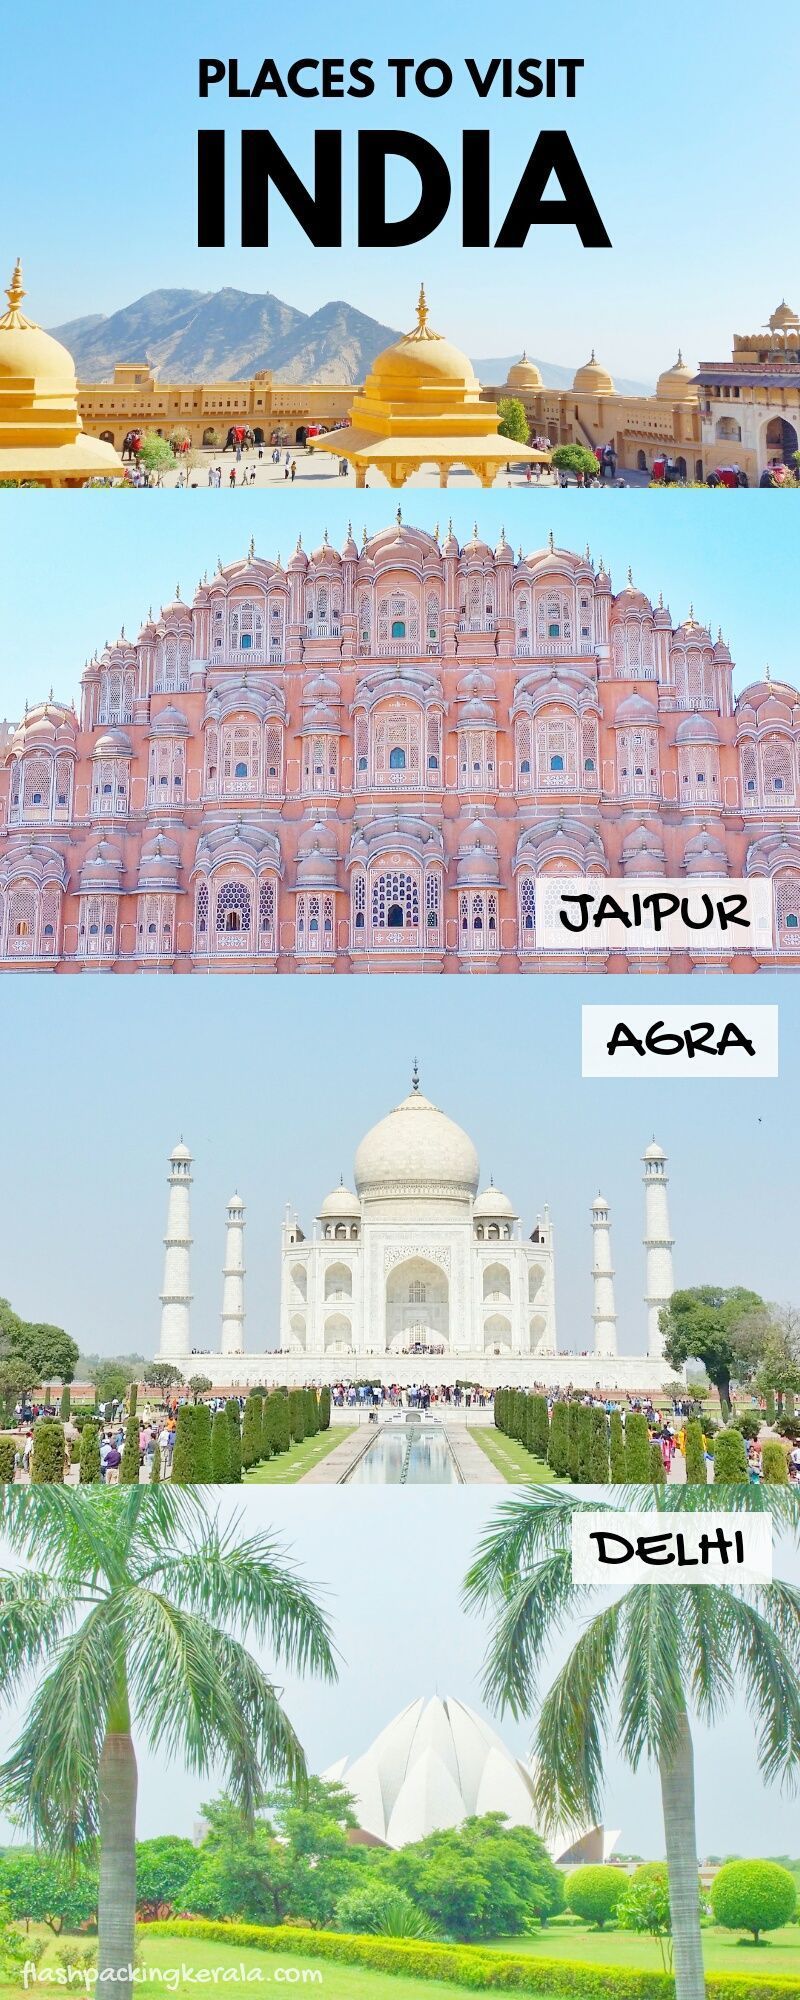 Golden Triangle India itinerary 2019 as DIY tour by train, bus, taxi рџљЉ Backpacking India -   11 travel destinations India taj mahal ideas